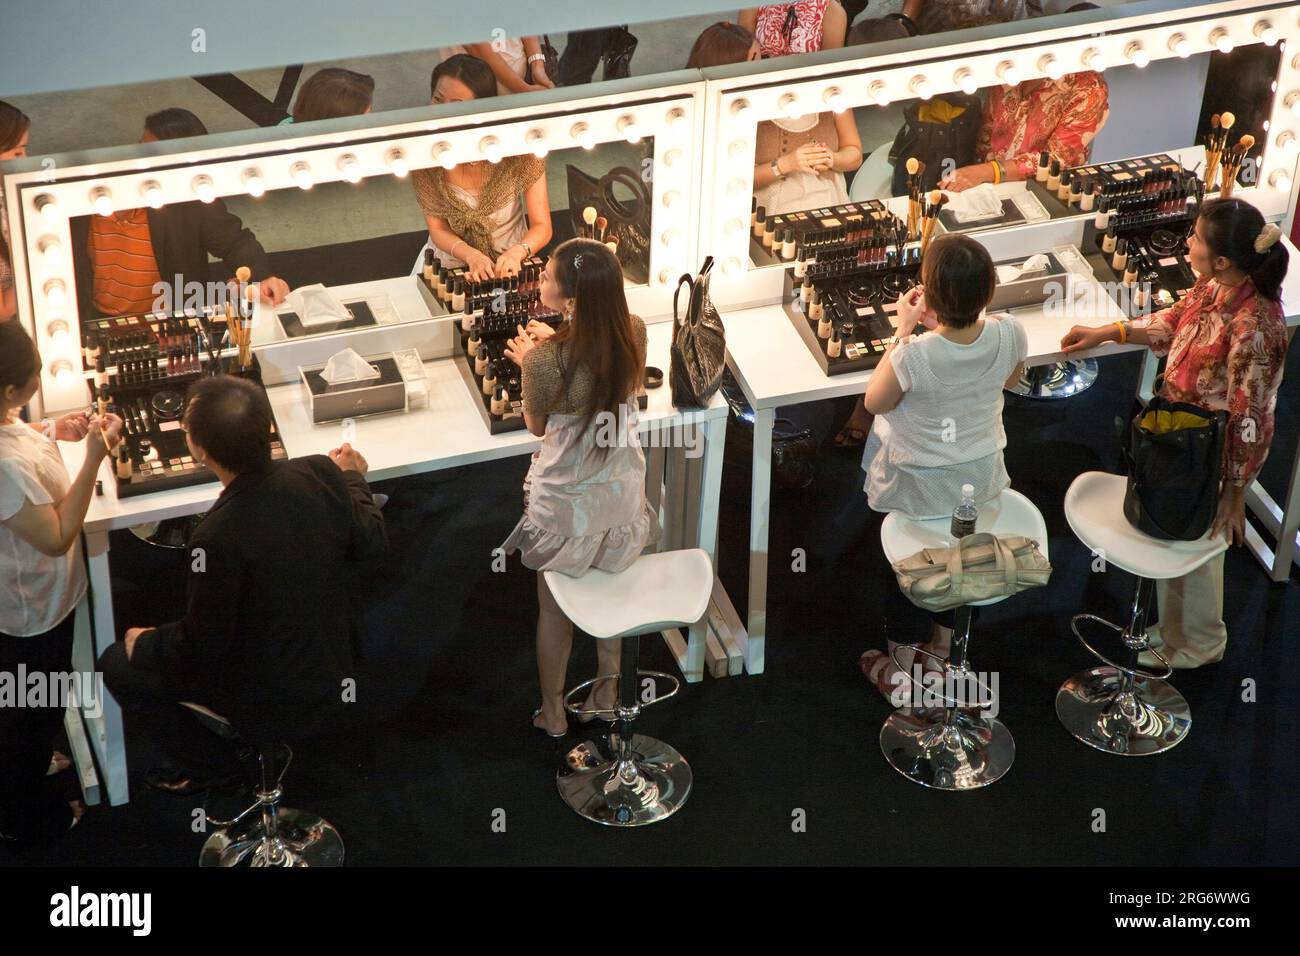 BANGKOK, THAILAND - May 11: the cosmetic company avery sponsores a makeup assistance course with its products in the central world shopping center and Stock Photo